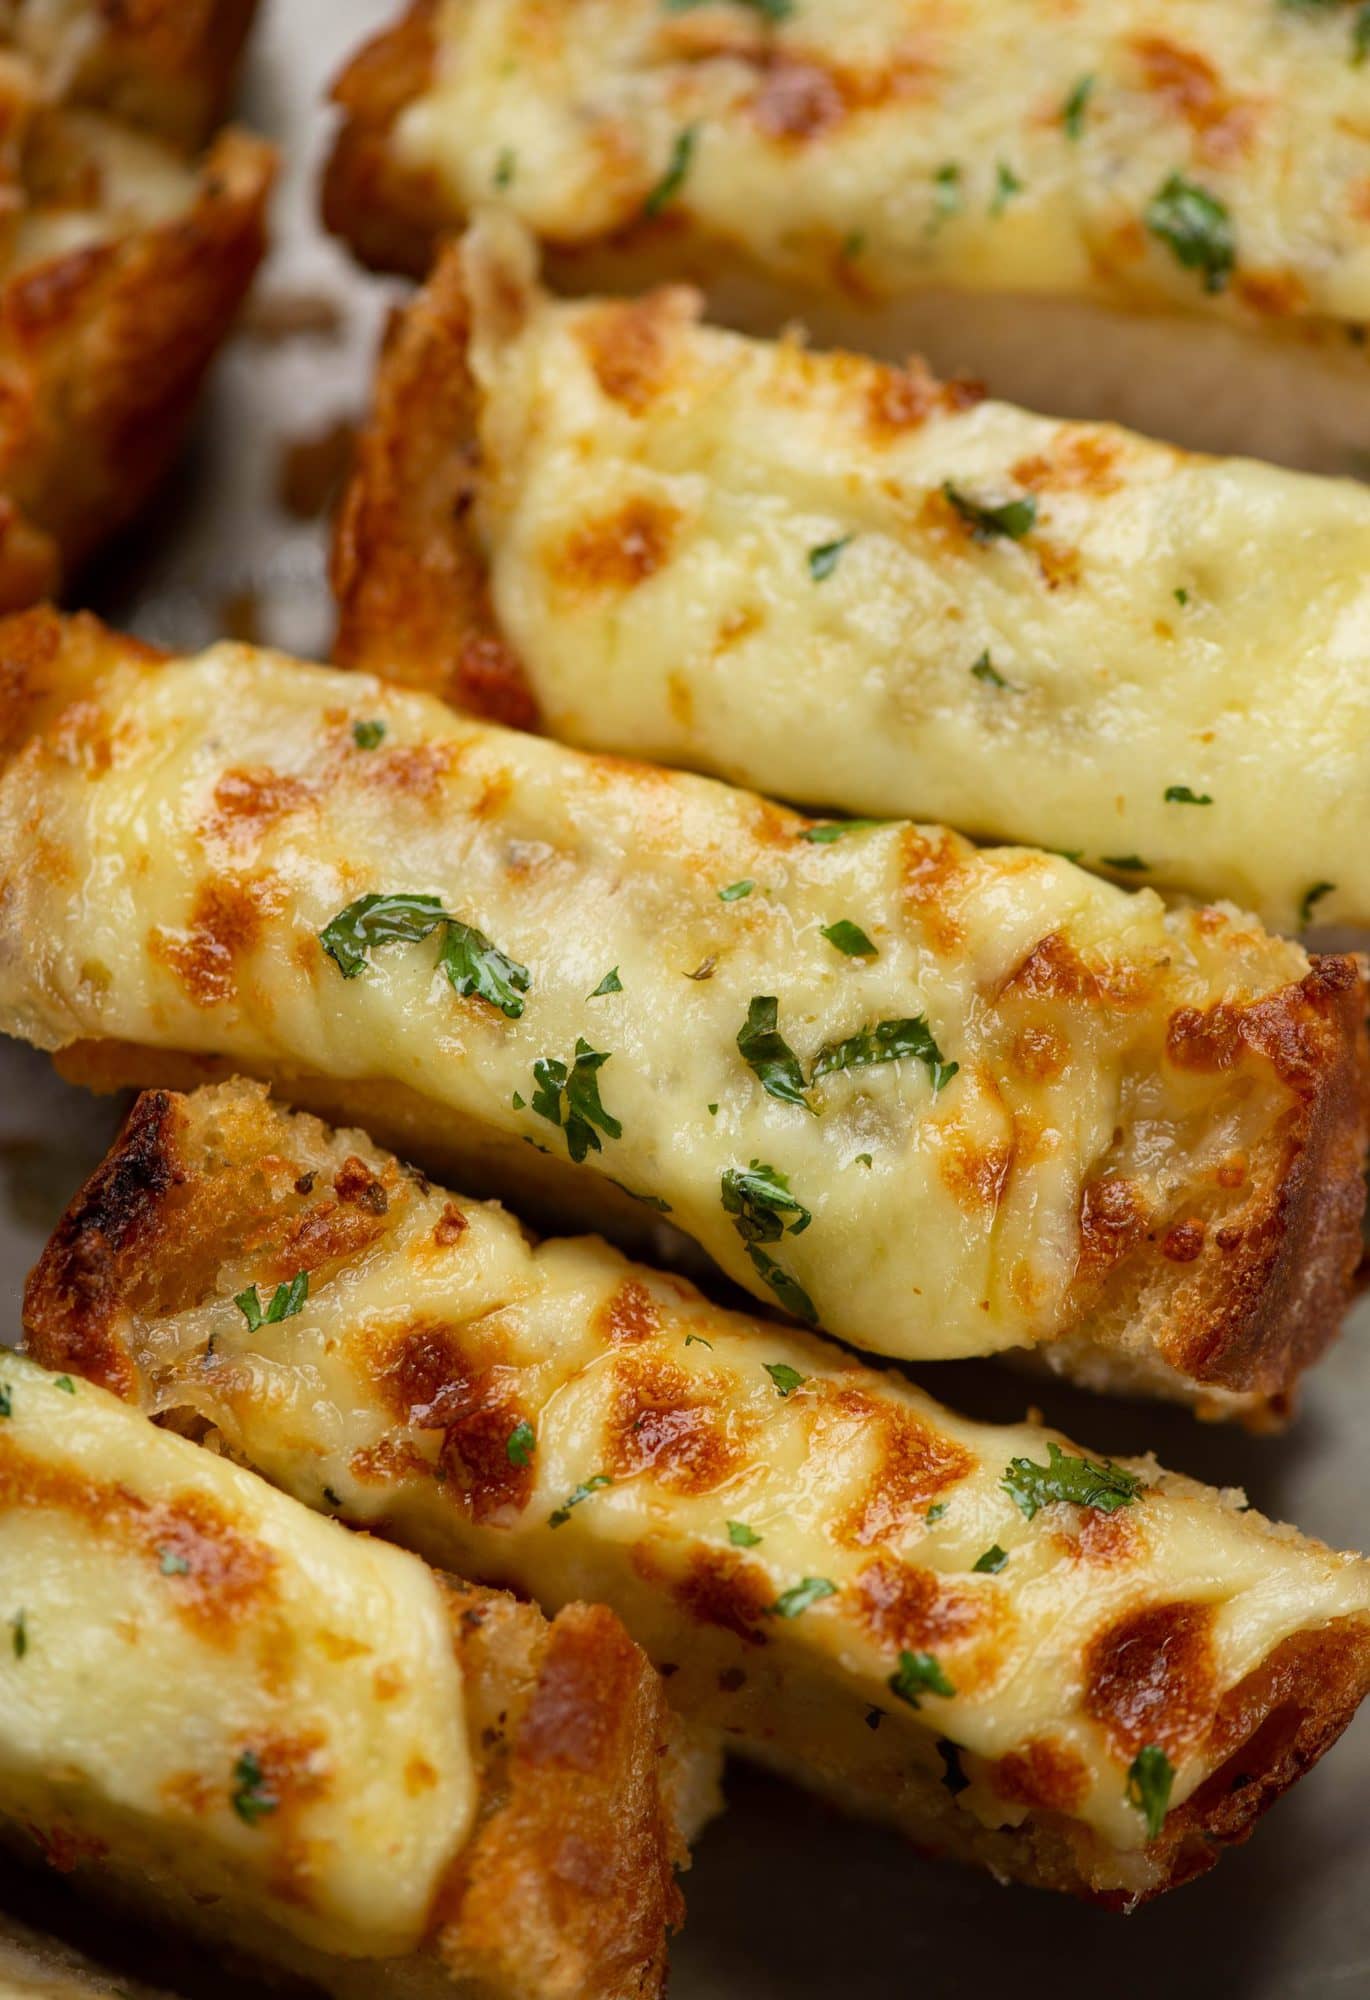 This recipe is the quickest and easiest way to make Garlic Bread. Cheesy, garlic-y deliciousness with crunchy edges is perfect to pair with pasta, dunk into soups, or serve as a side dish. 